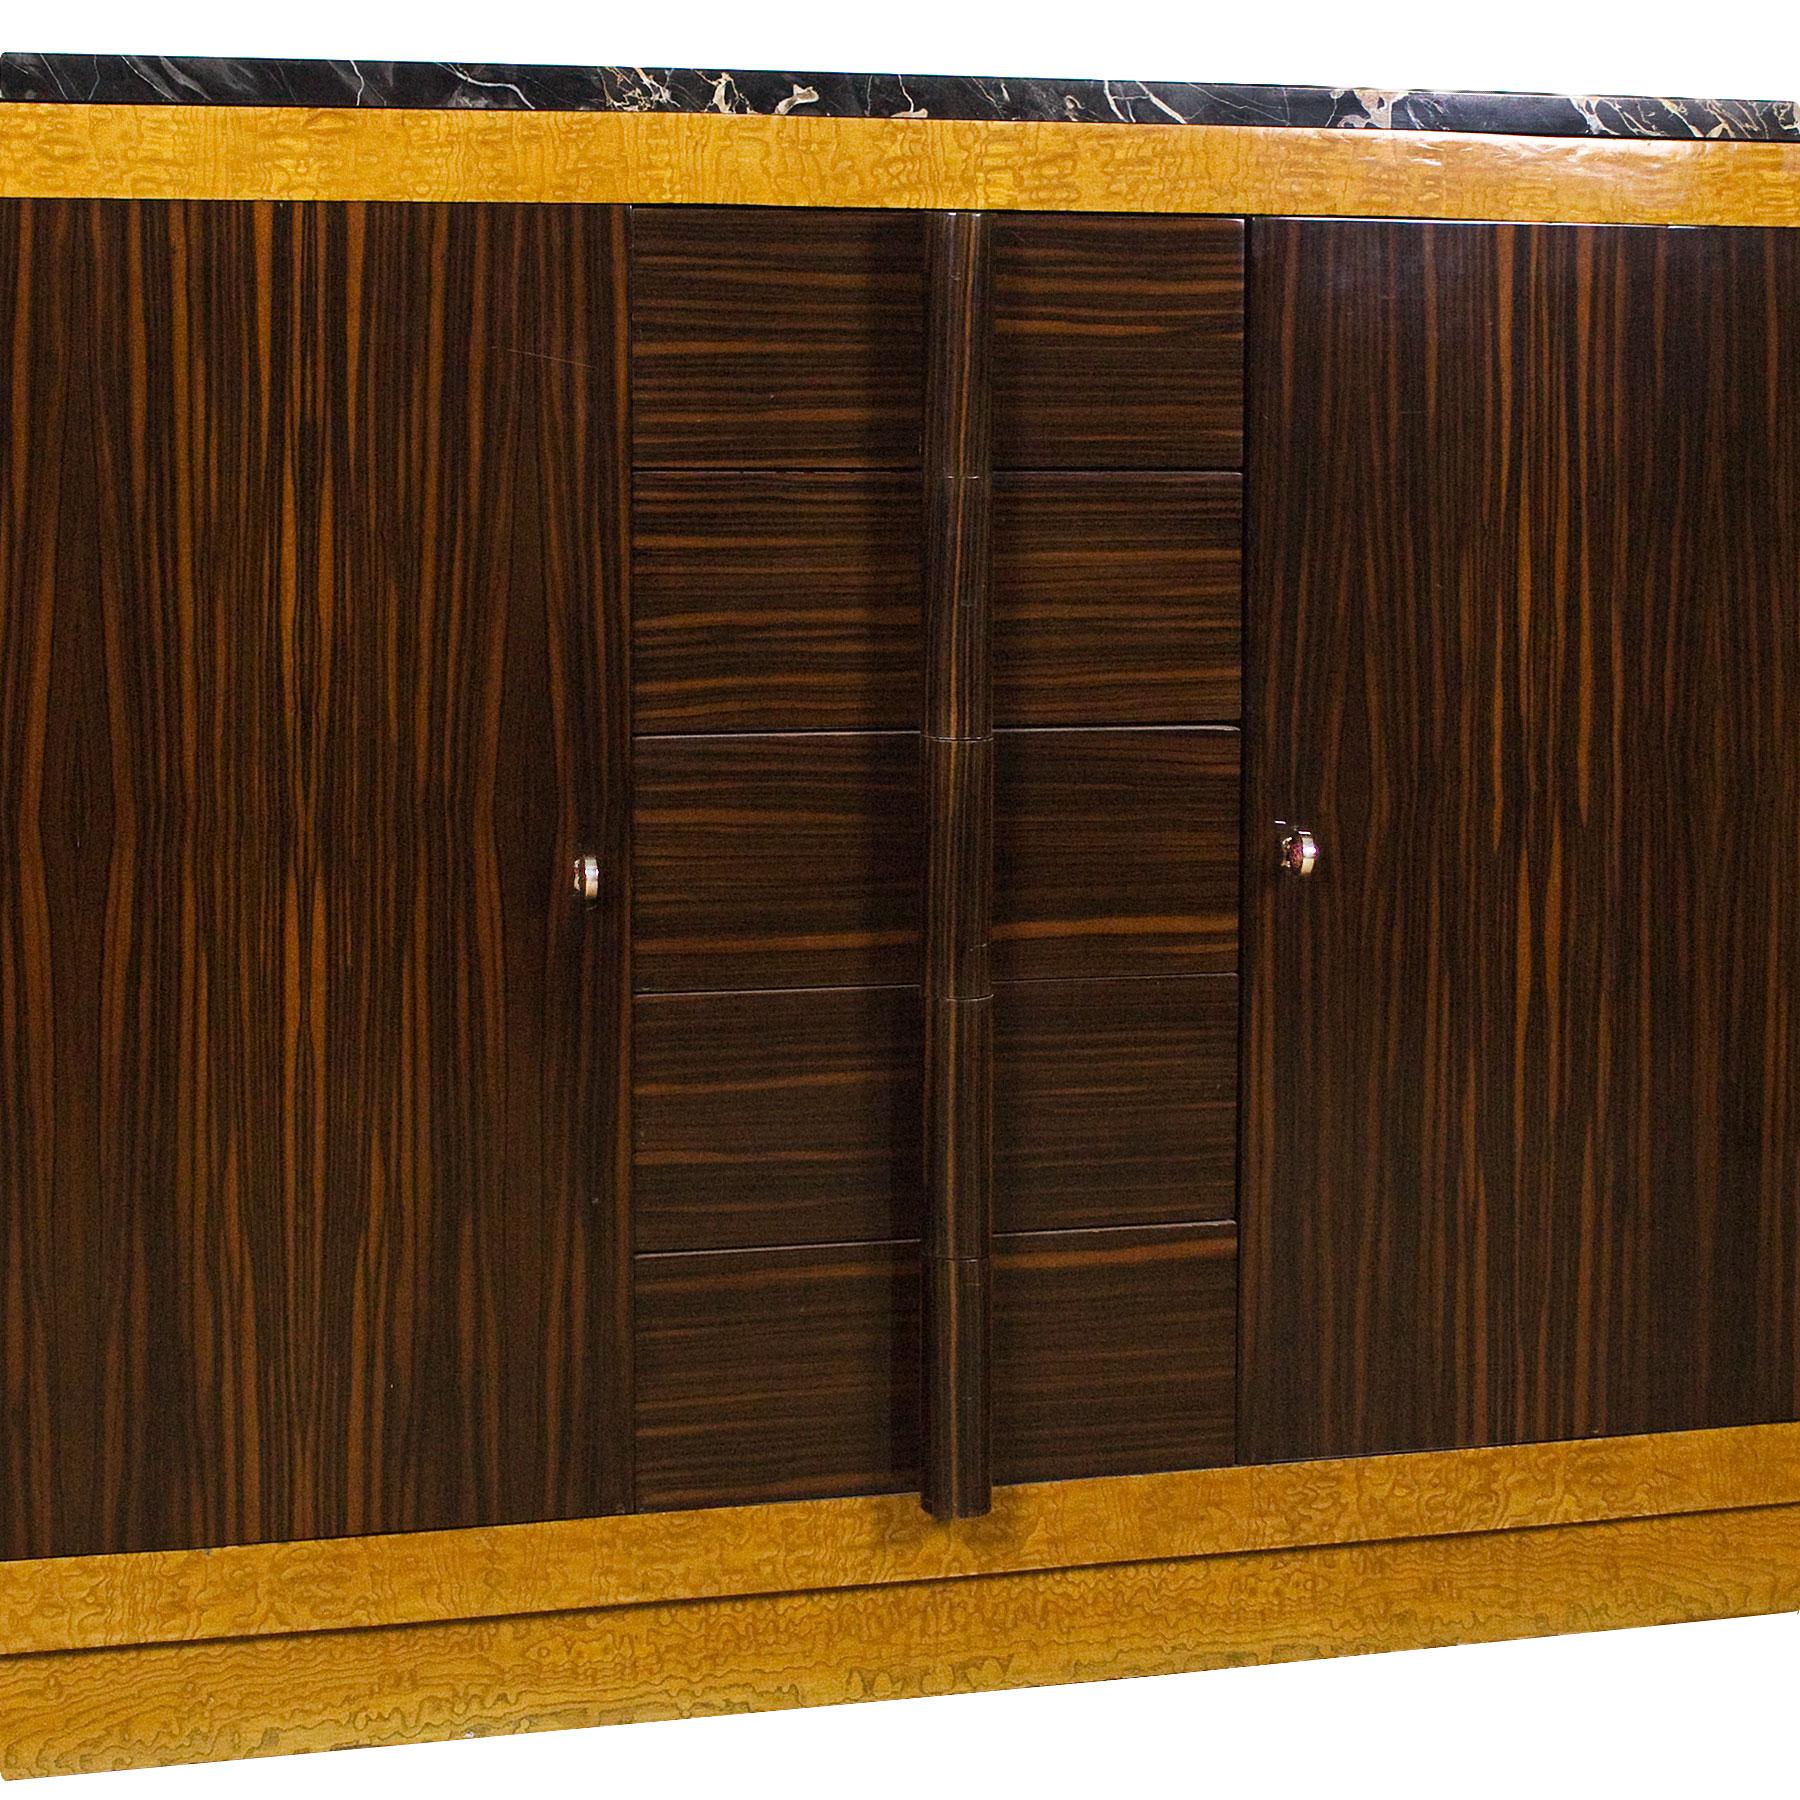 Rounded Art Deco Sideboard by Jean Fauré, Macassar Ebony - France, 1930s For Sale 2